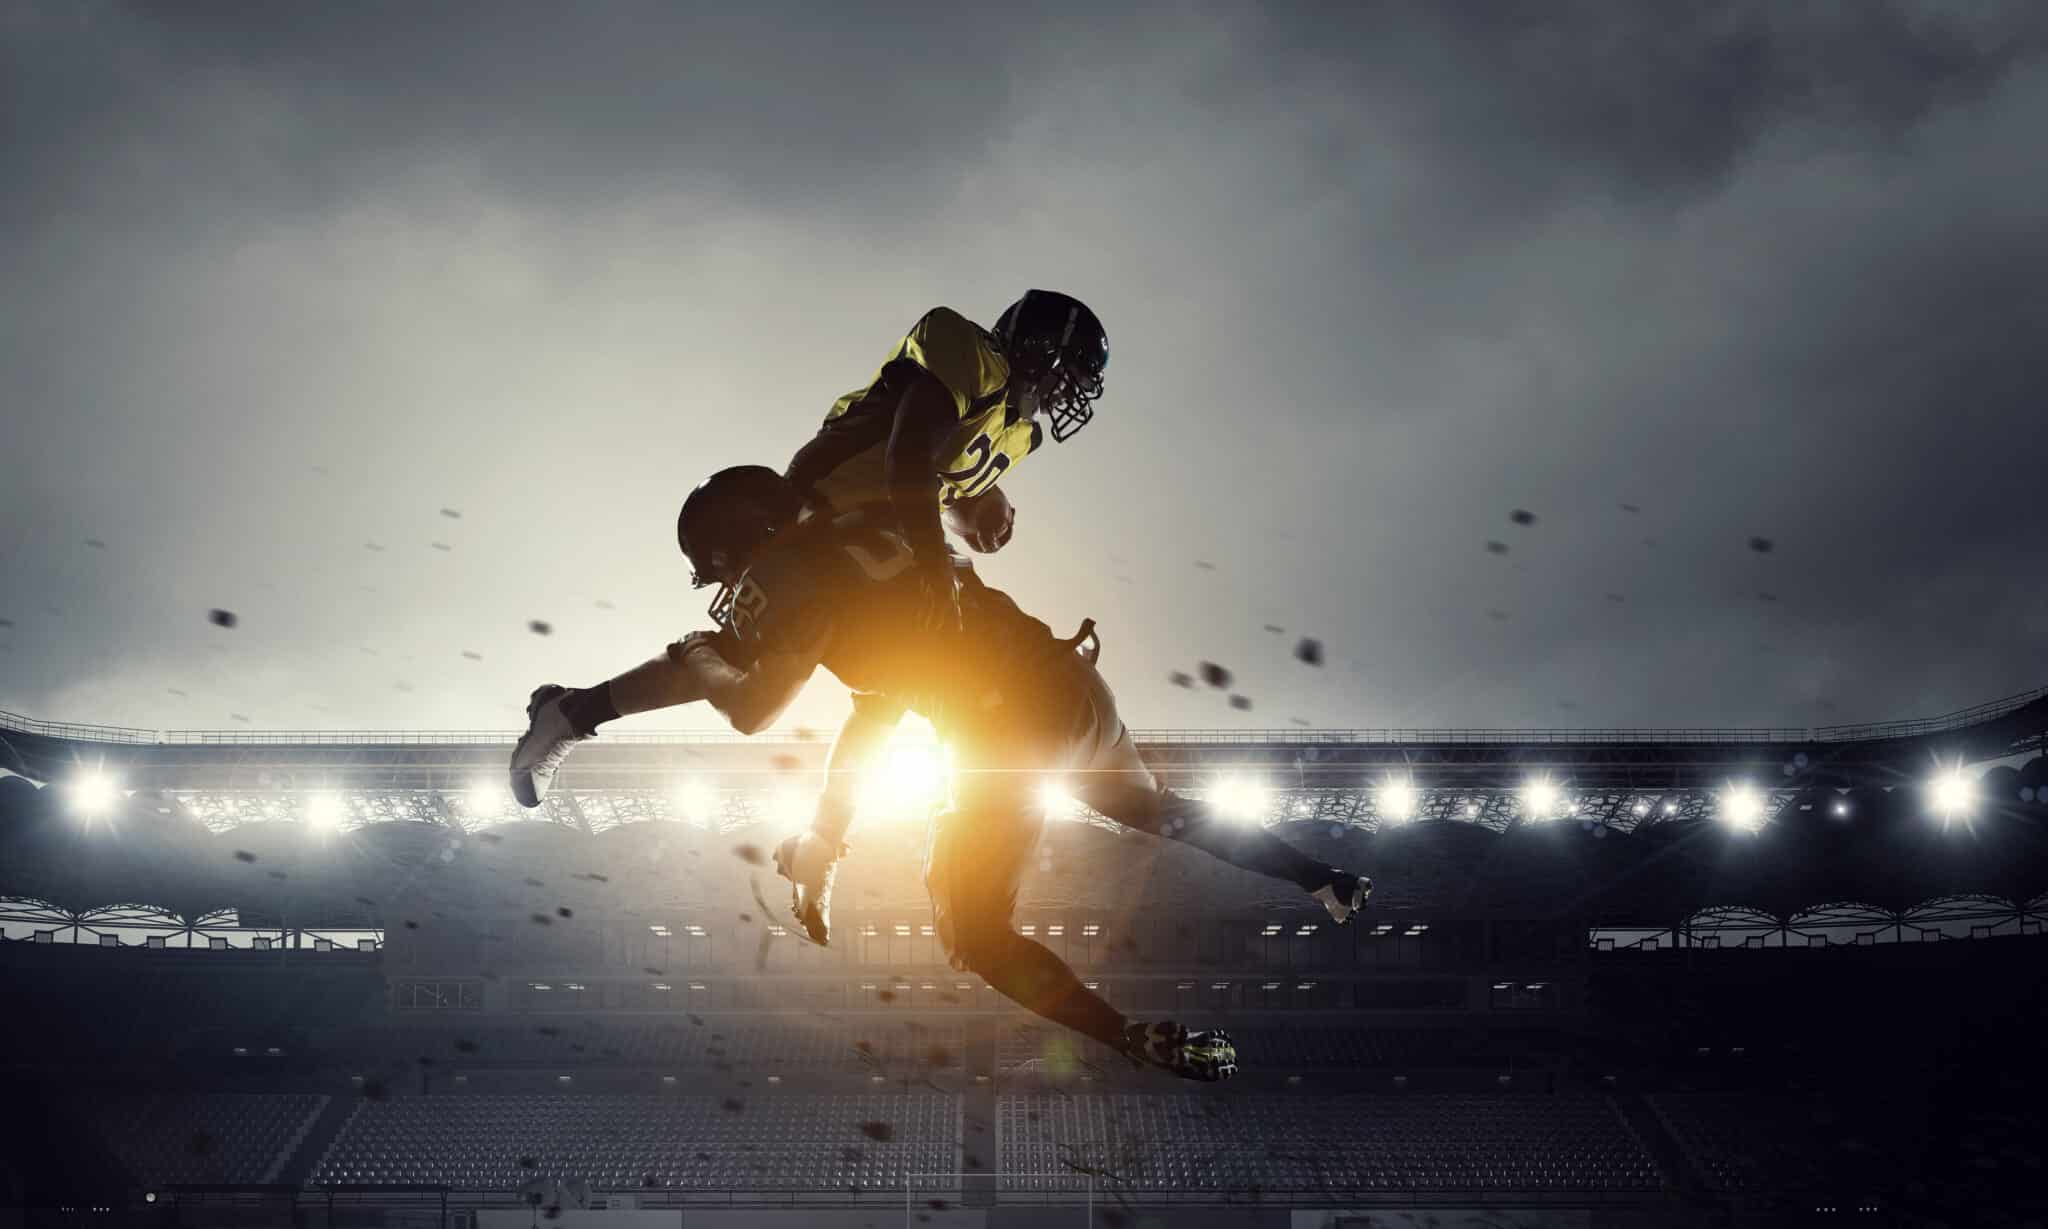 There are more parallels between football and cyber security than you may realize. Contact Athreon to bolster your cyber security defenses!